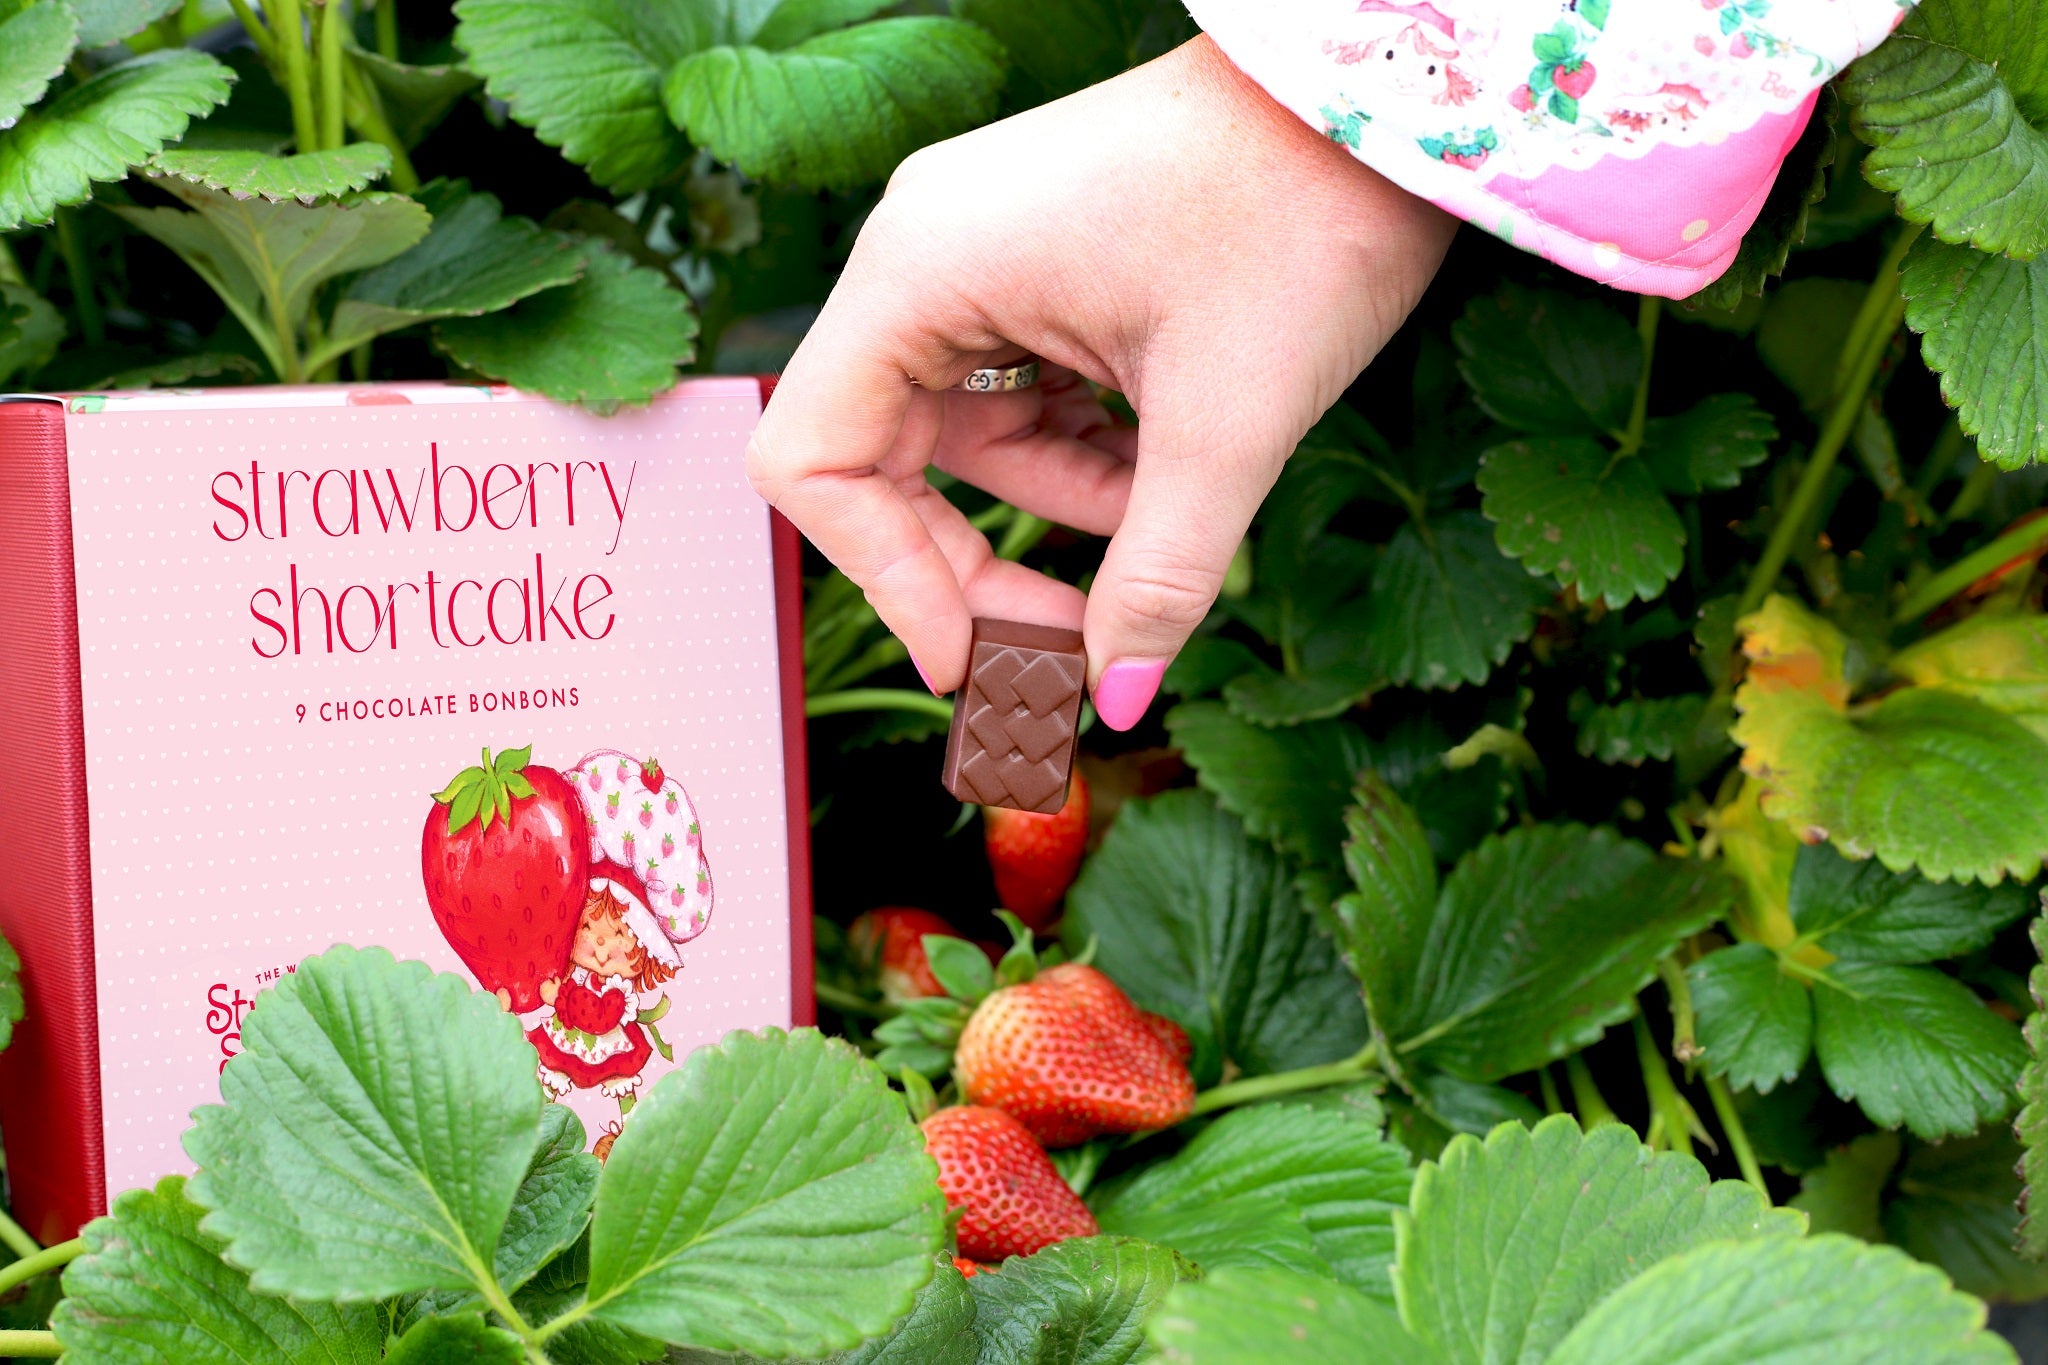 A woman's hand picking a chocolate bonbon in a strawberry field next to a box of strawberry shortcake and chuao bonbons